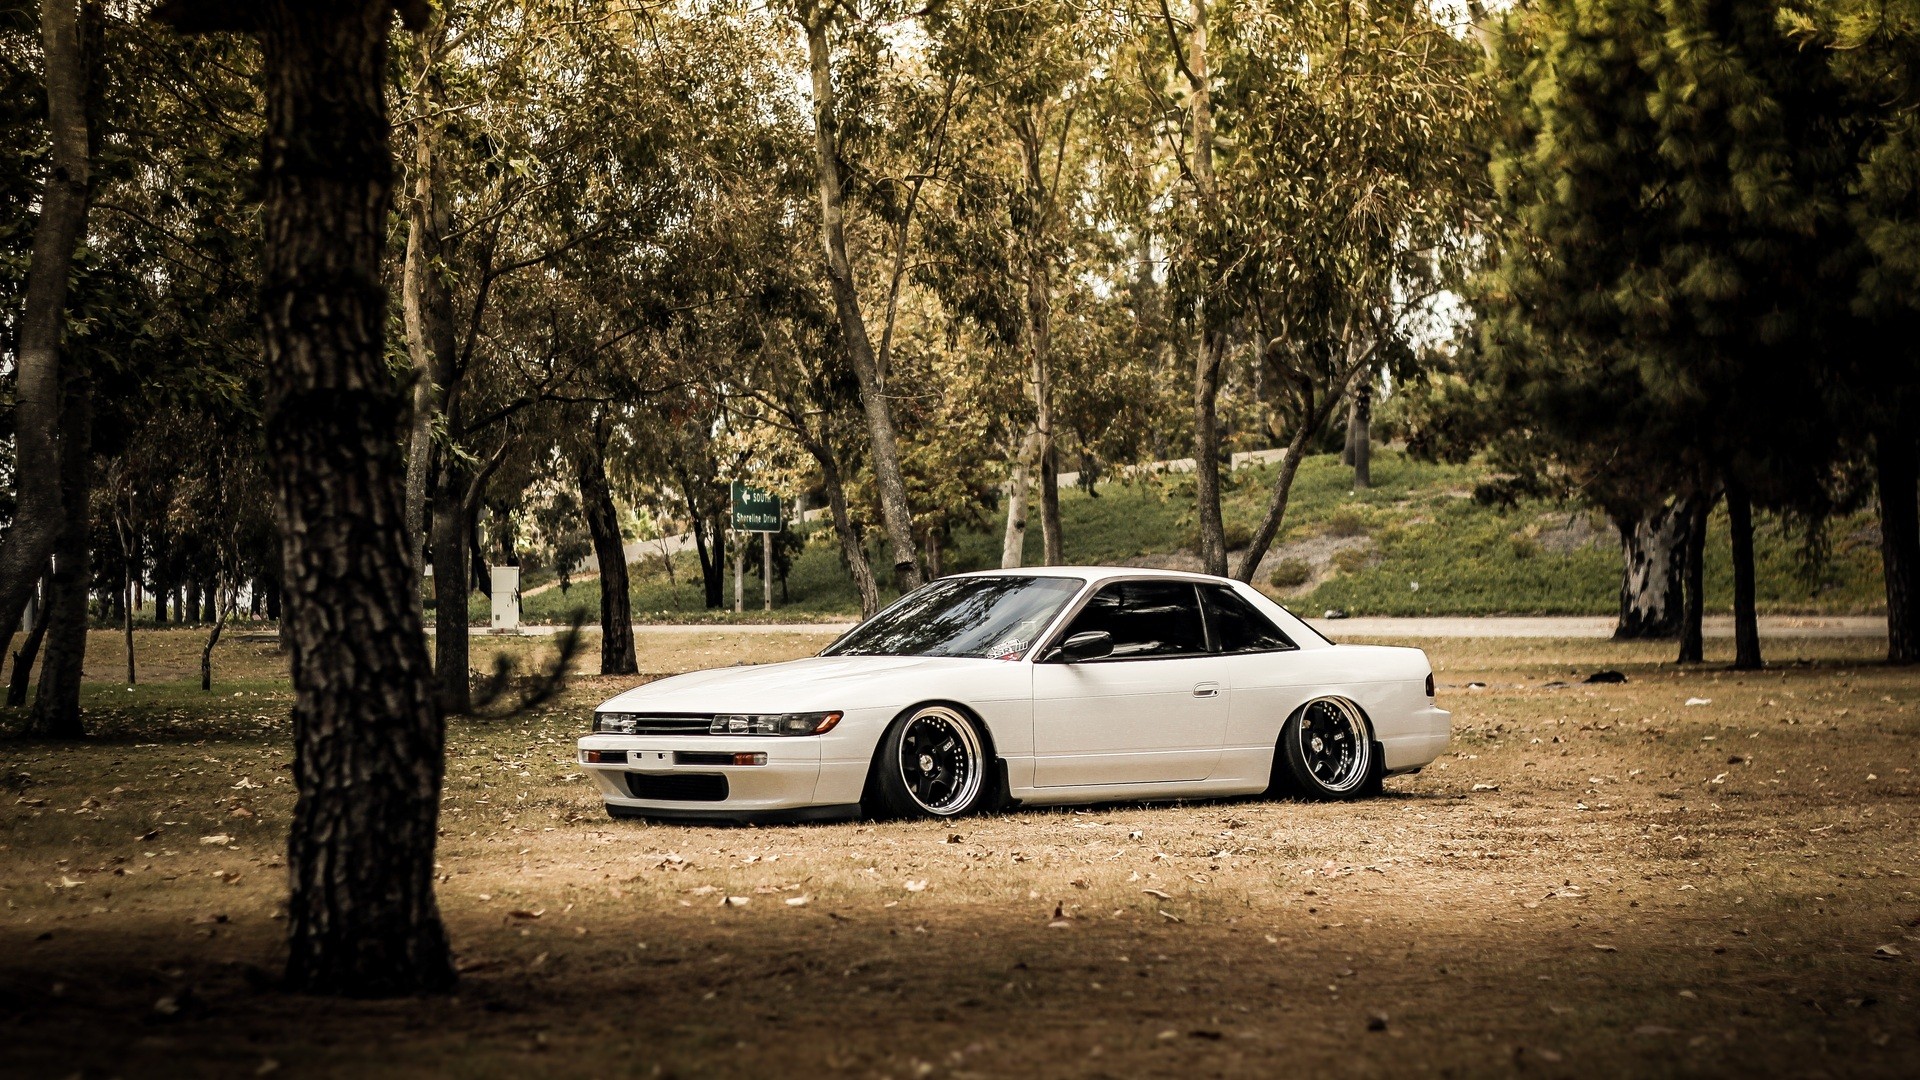  white cars tuned Nissan Silvia S13 stance jdm wallpaper background